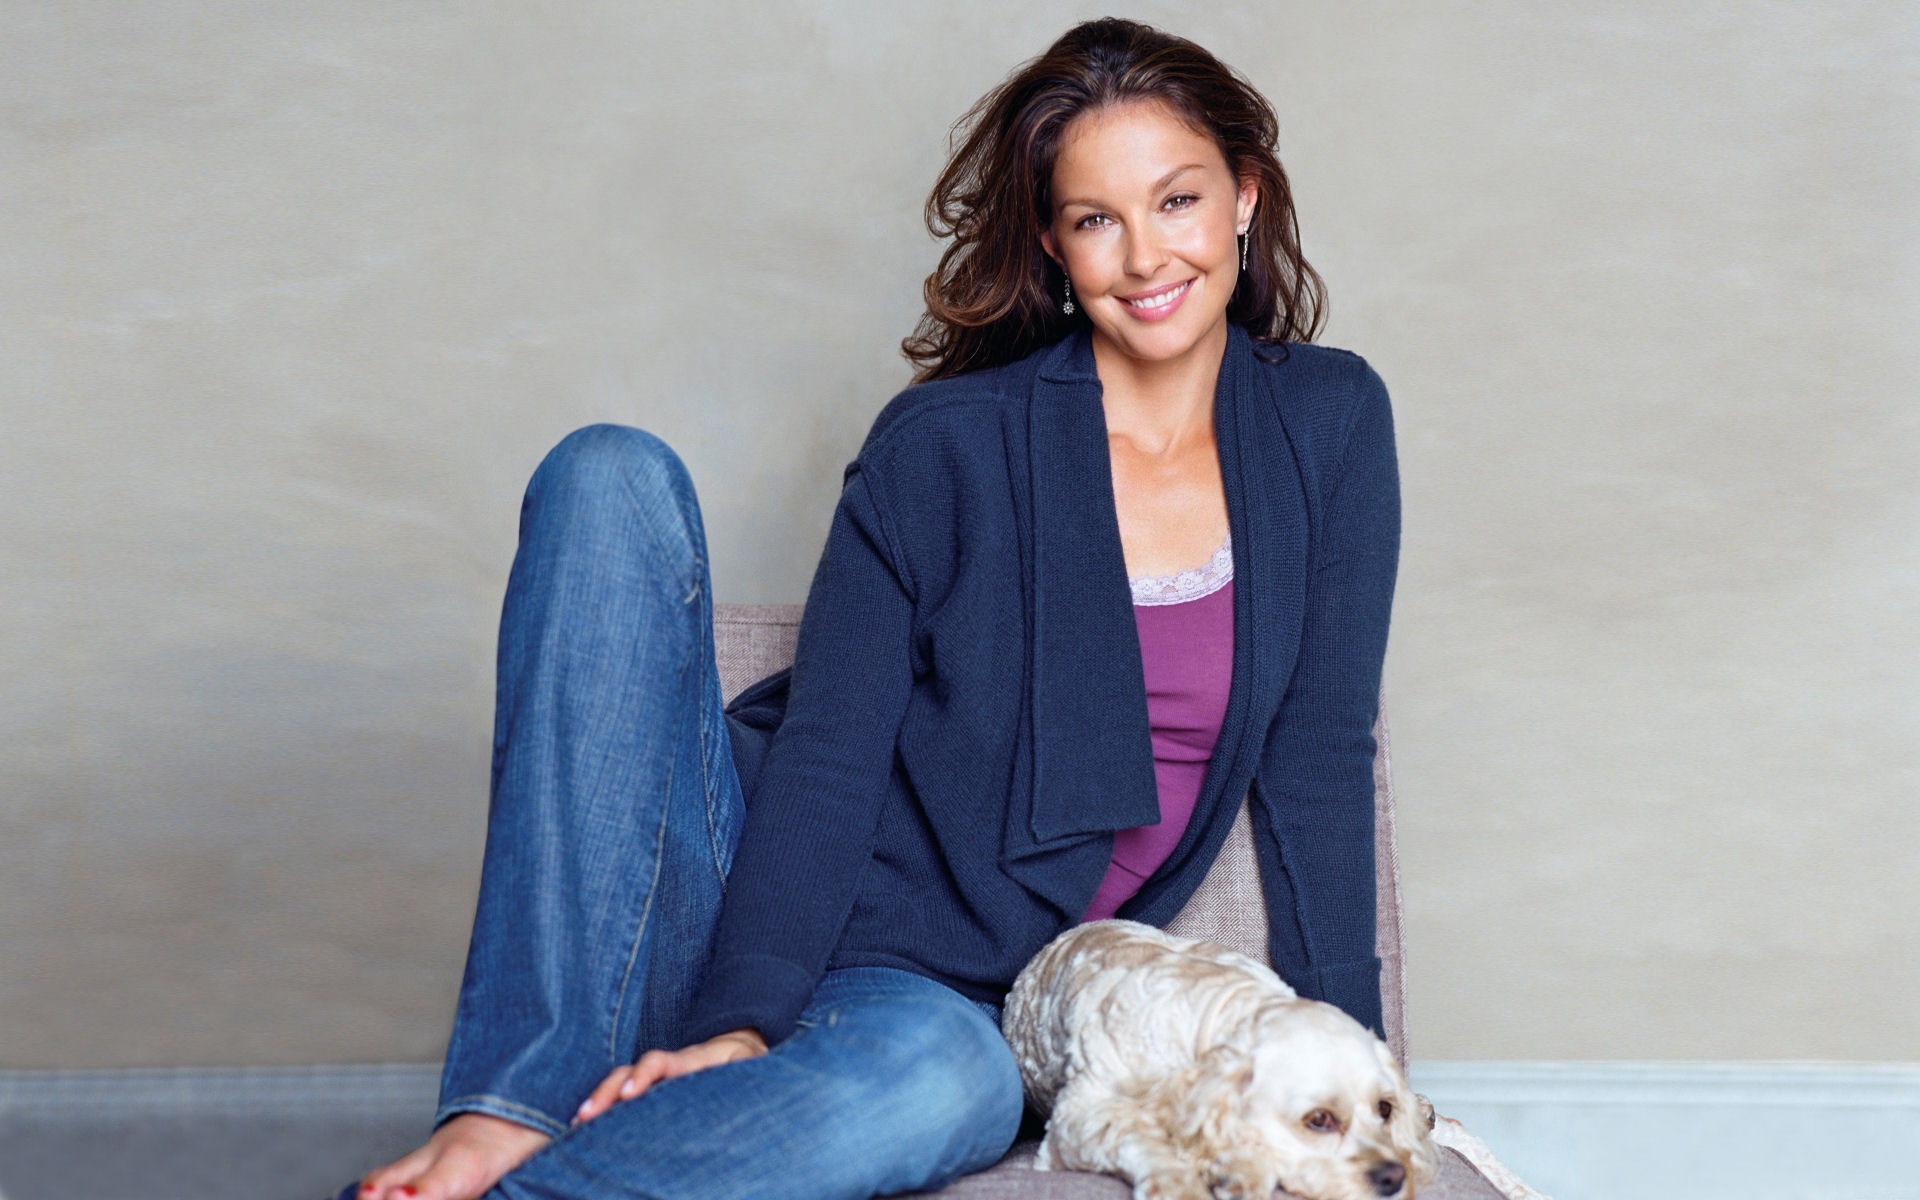 Ashley Judd Smile for 1920 x 1200 widescreen resolution